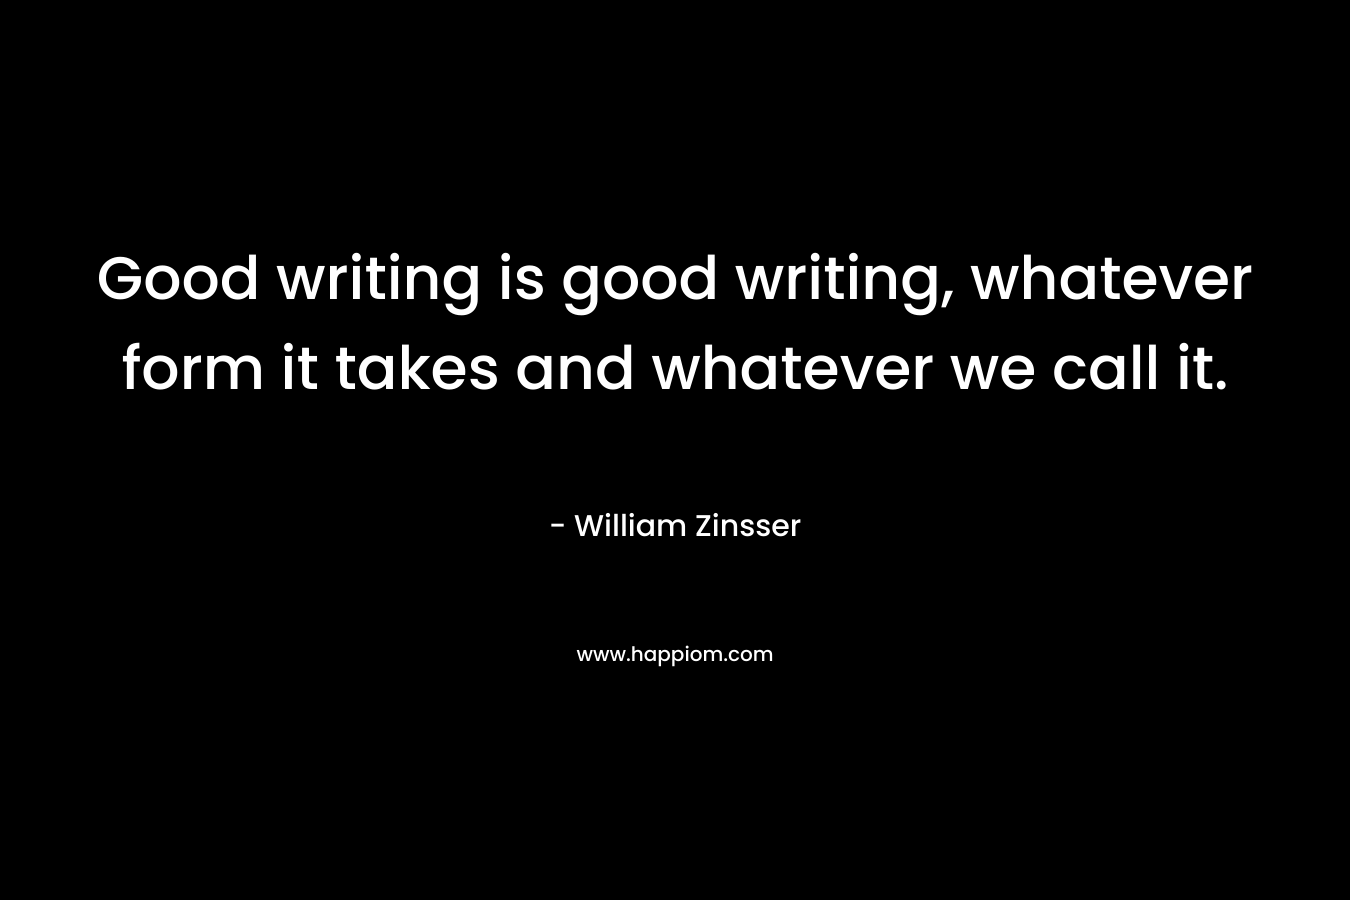 Good writing is good writing, whatever form it takes and whatever we call it.